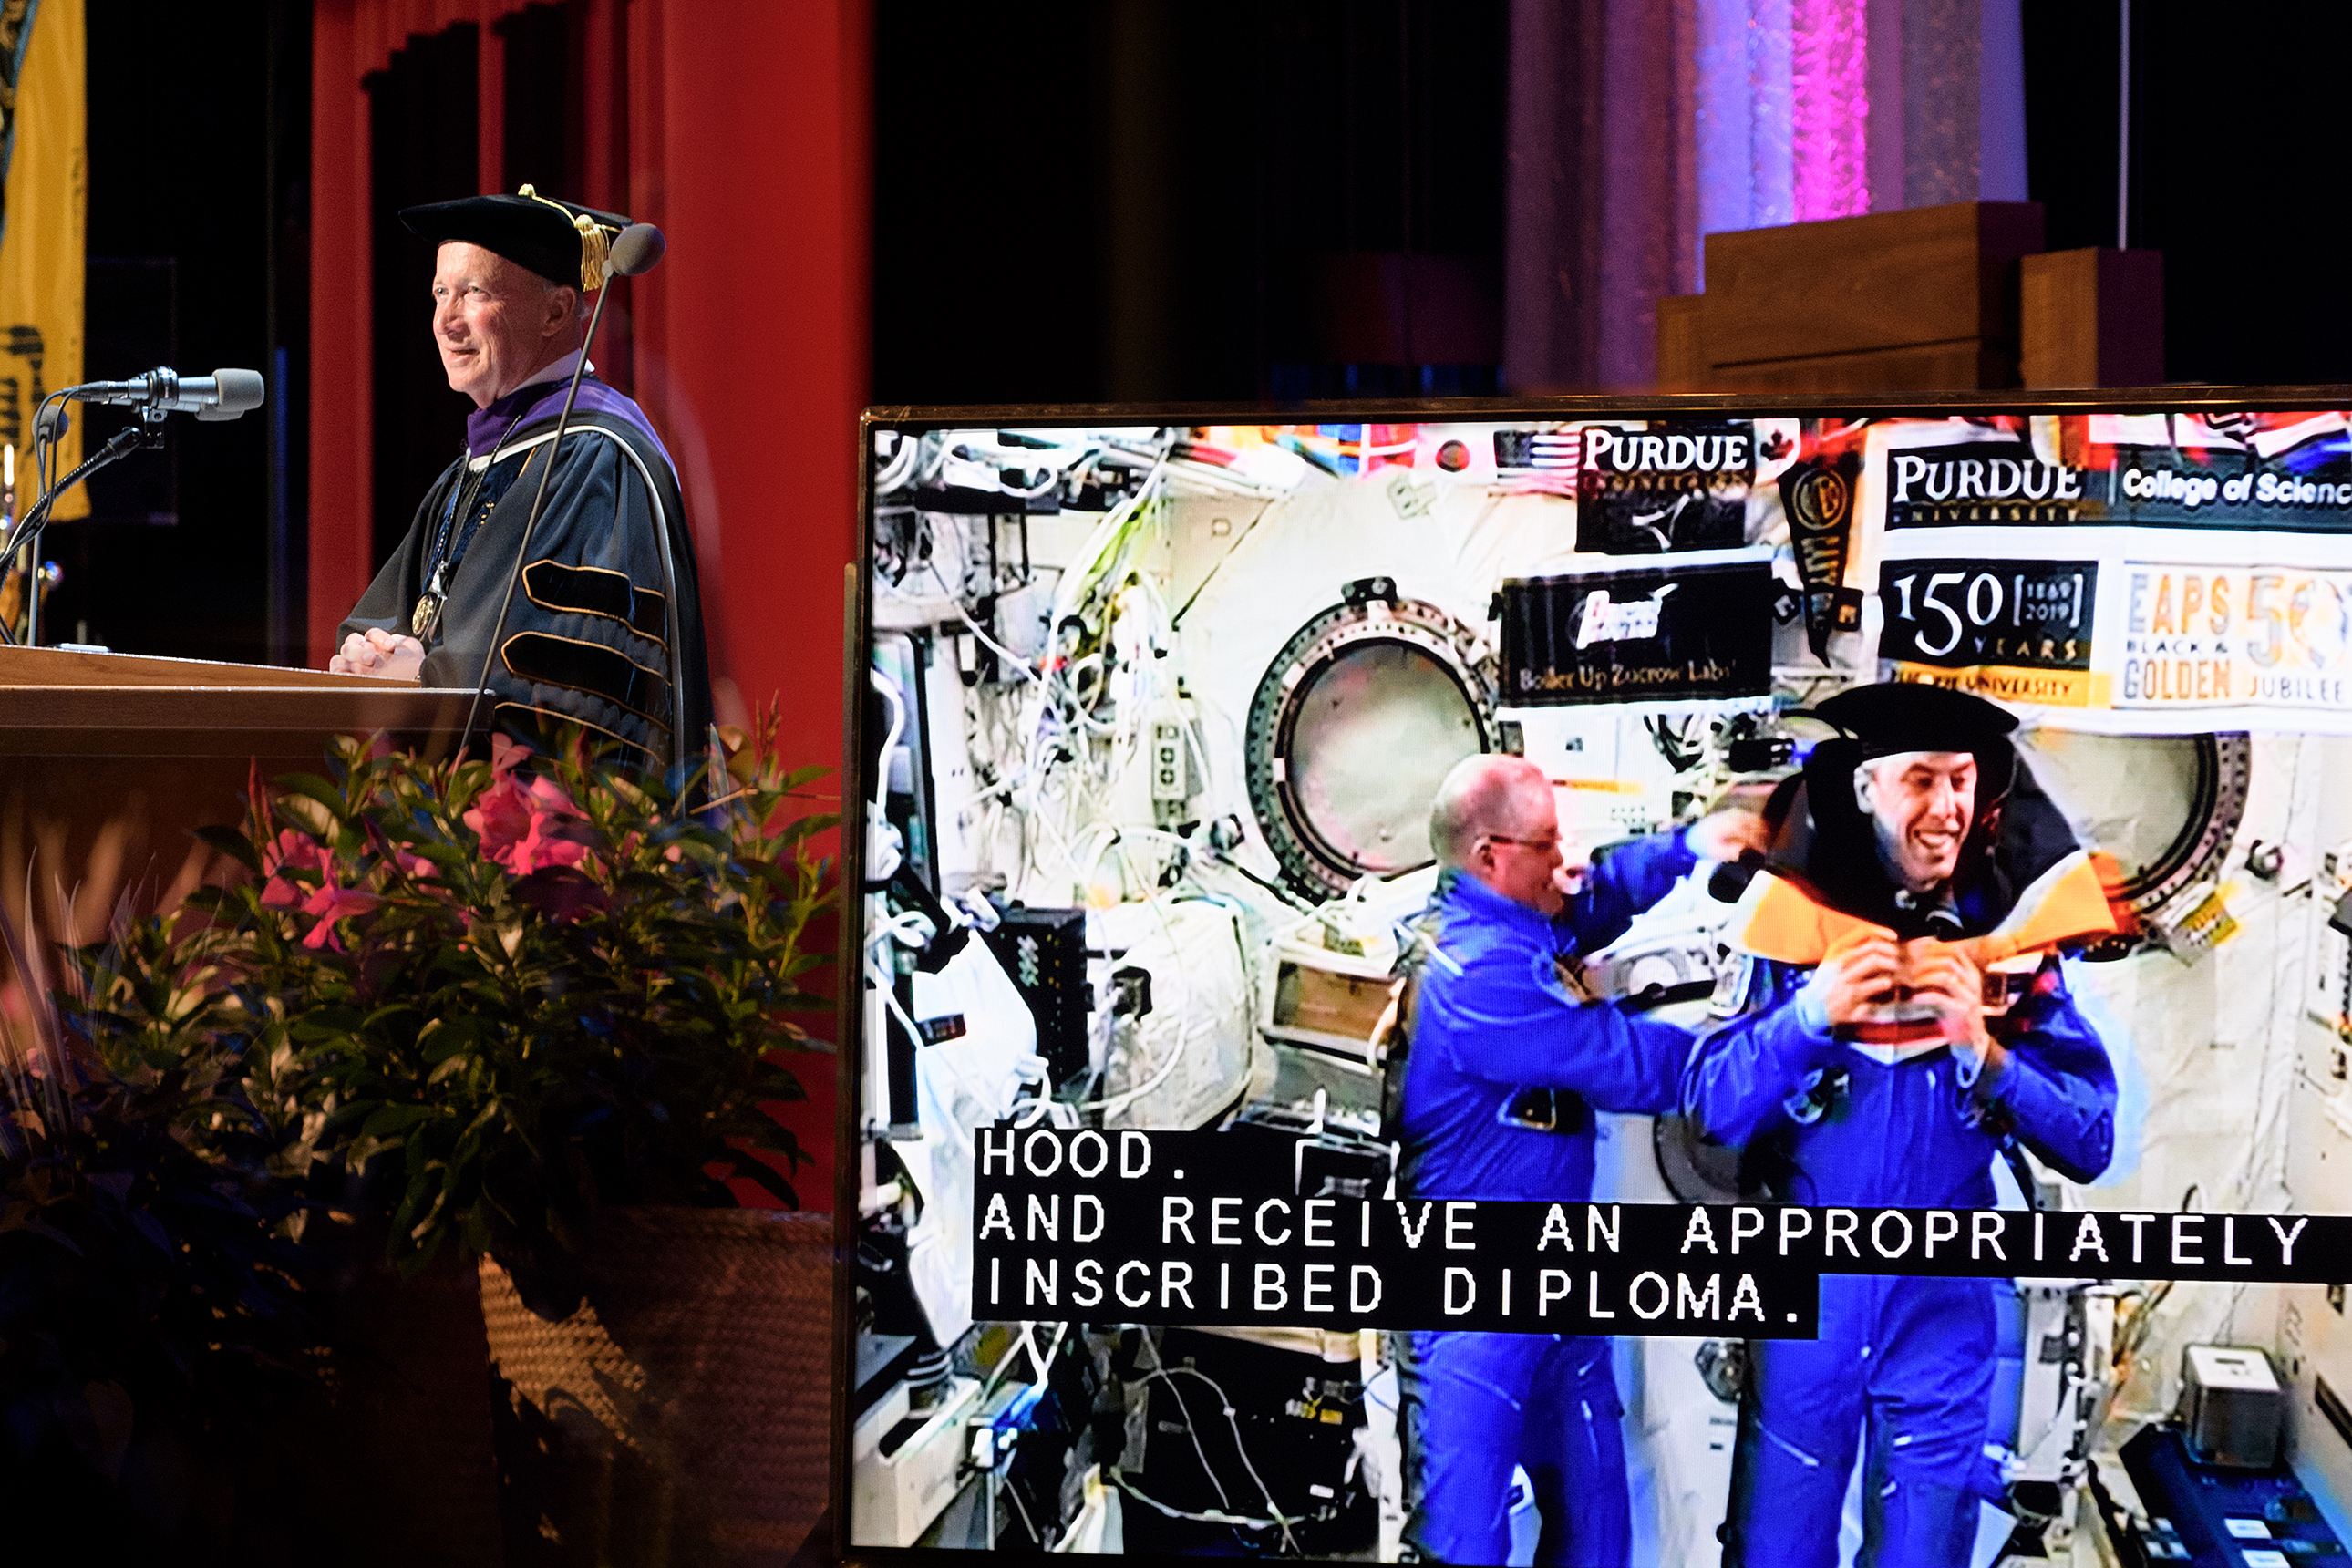 NASA astronaut Scott Tingle awards fellow astronaut Drew Feustel the ceremonial hood during a May 2018 Purdue commencement ceremony